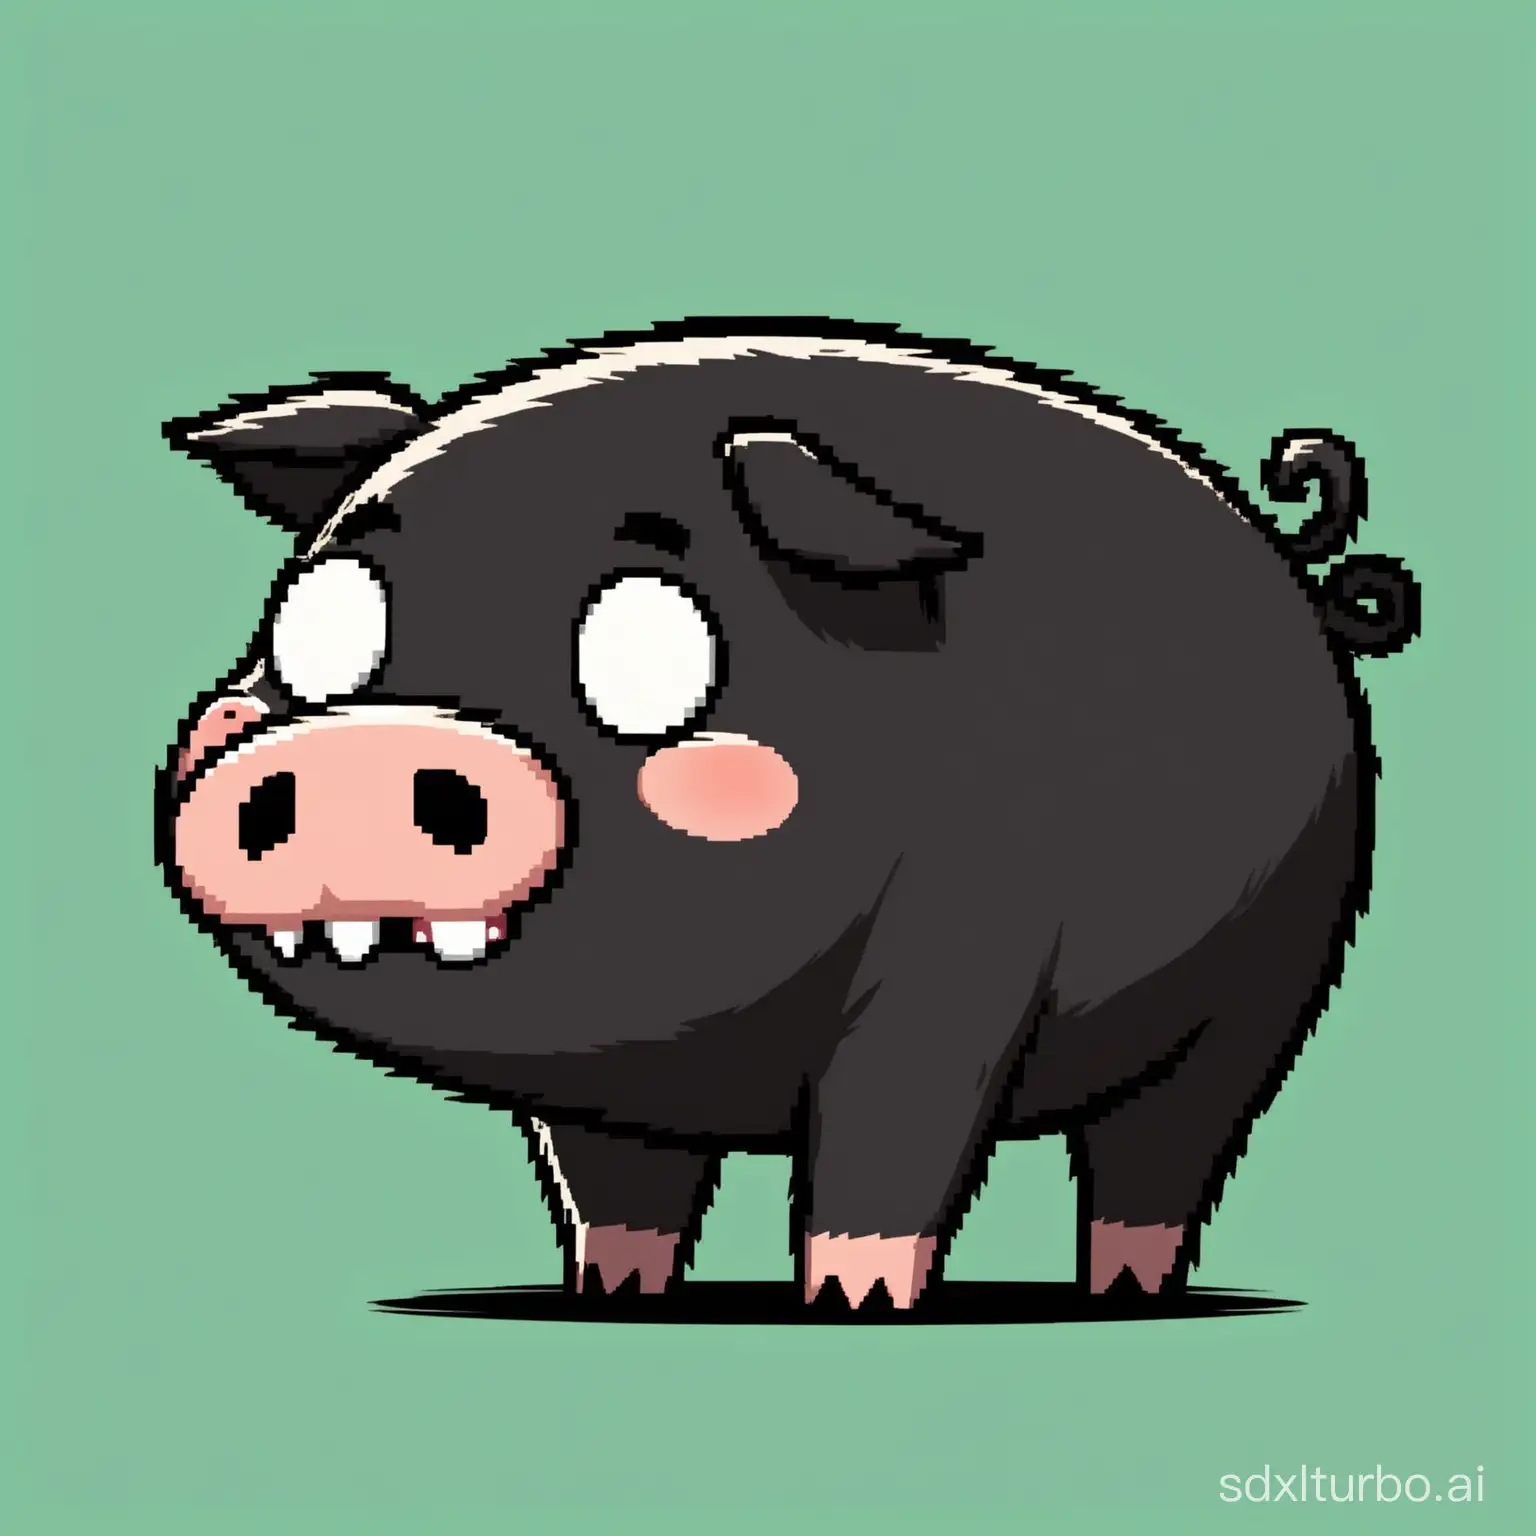 Side-View-of-Ferocious-Black-Pig-Video-Game-Character-with-Massive-Teeth